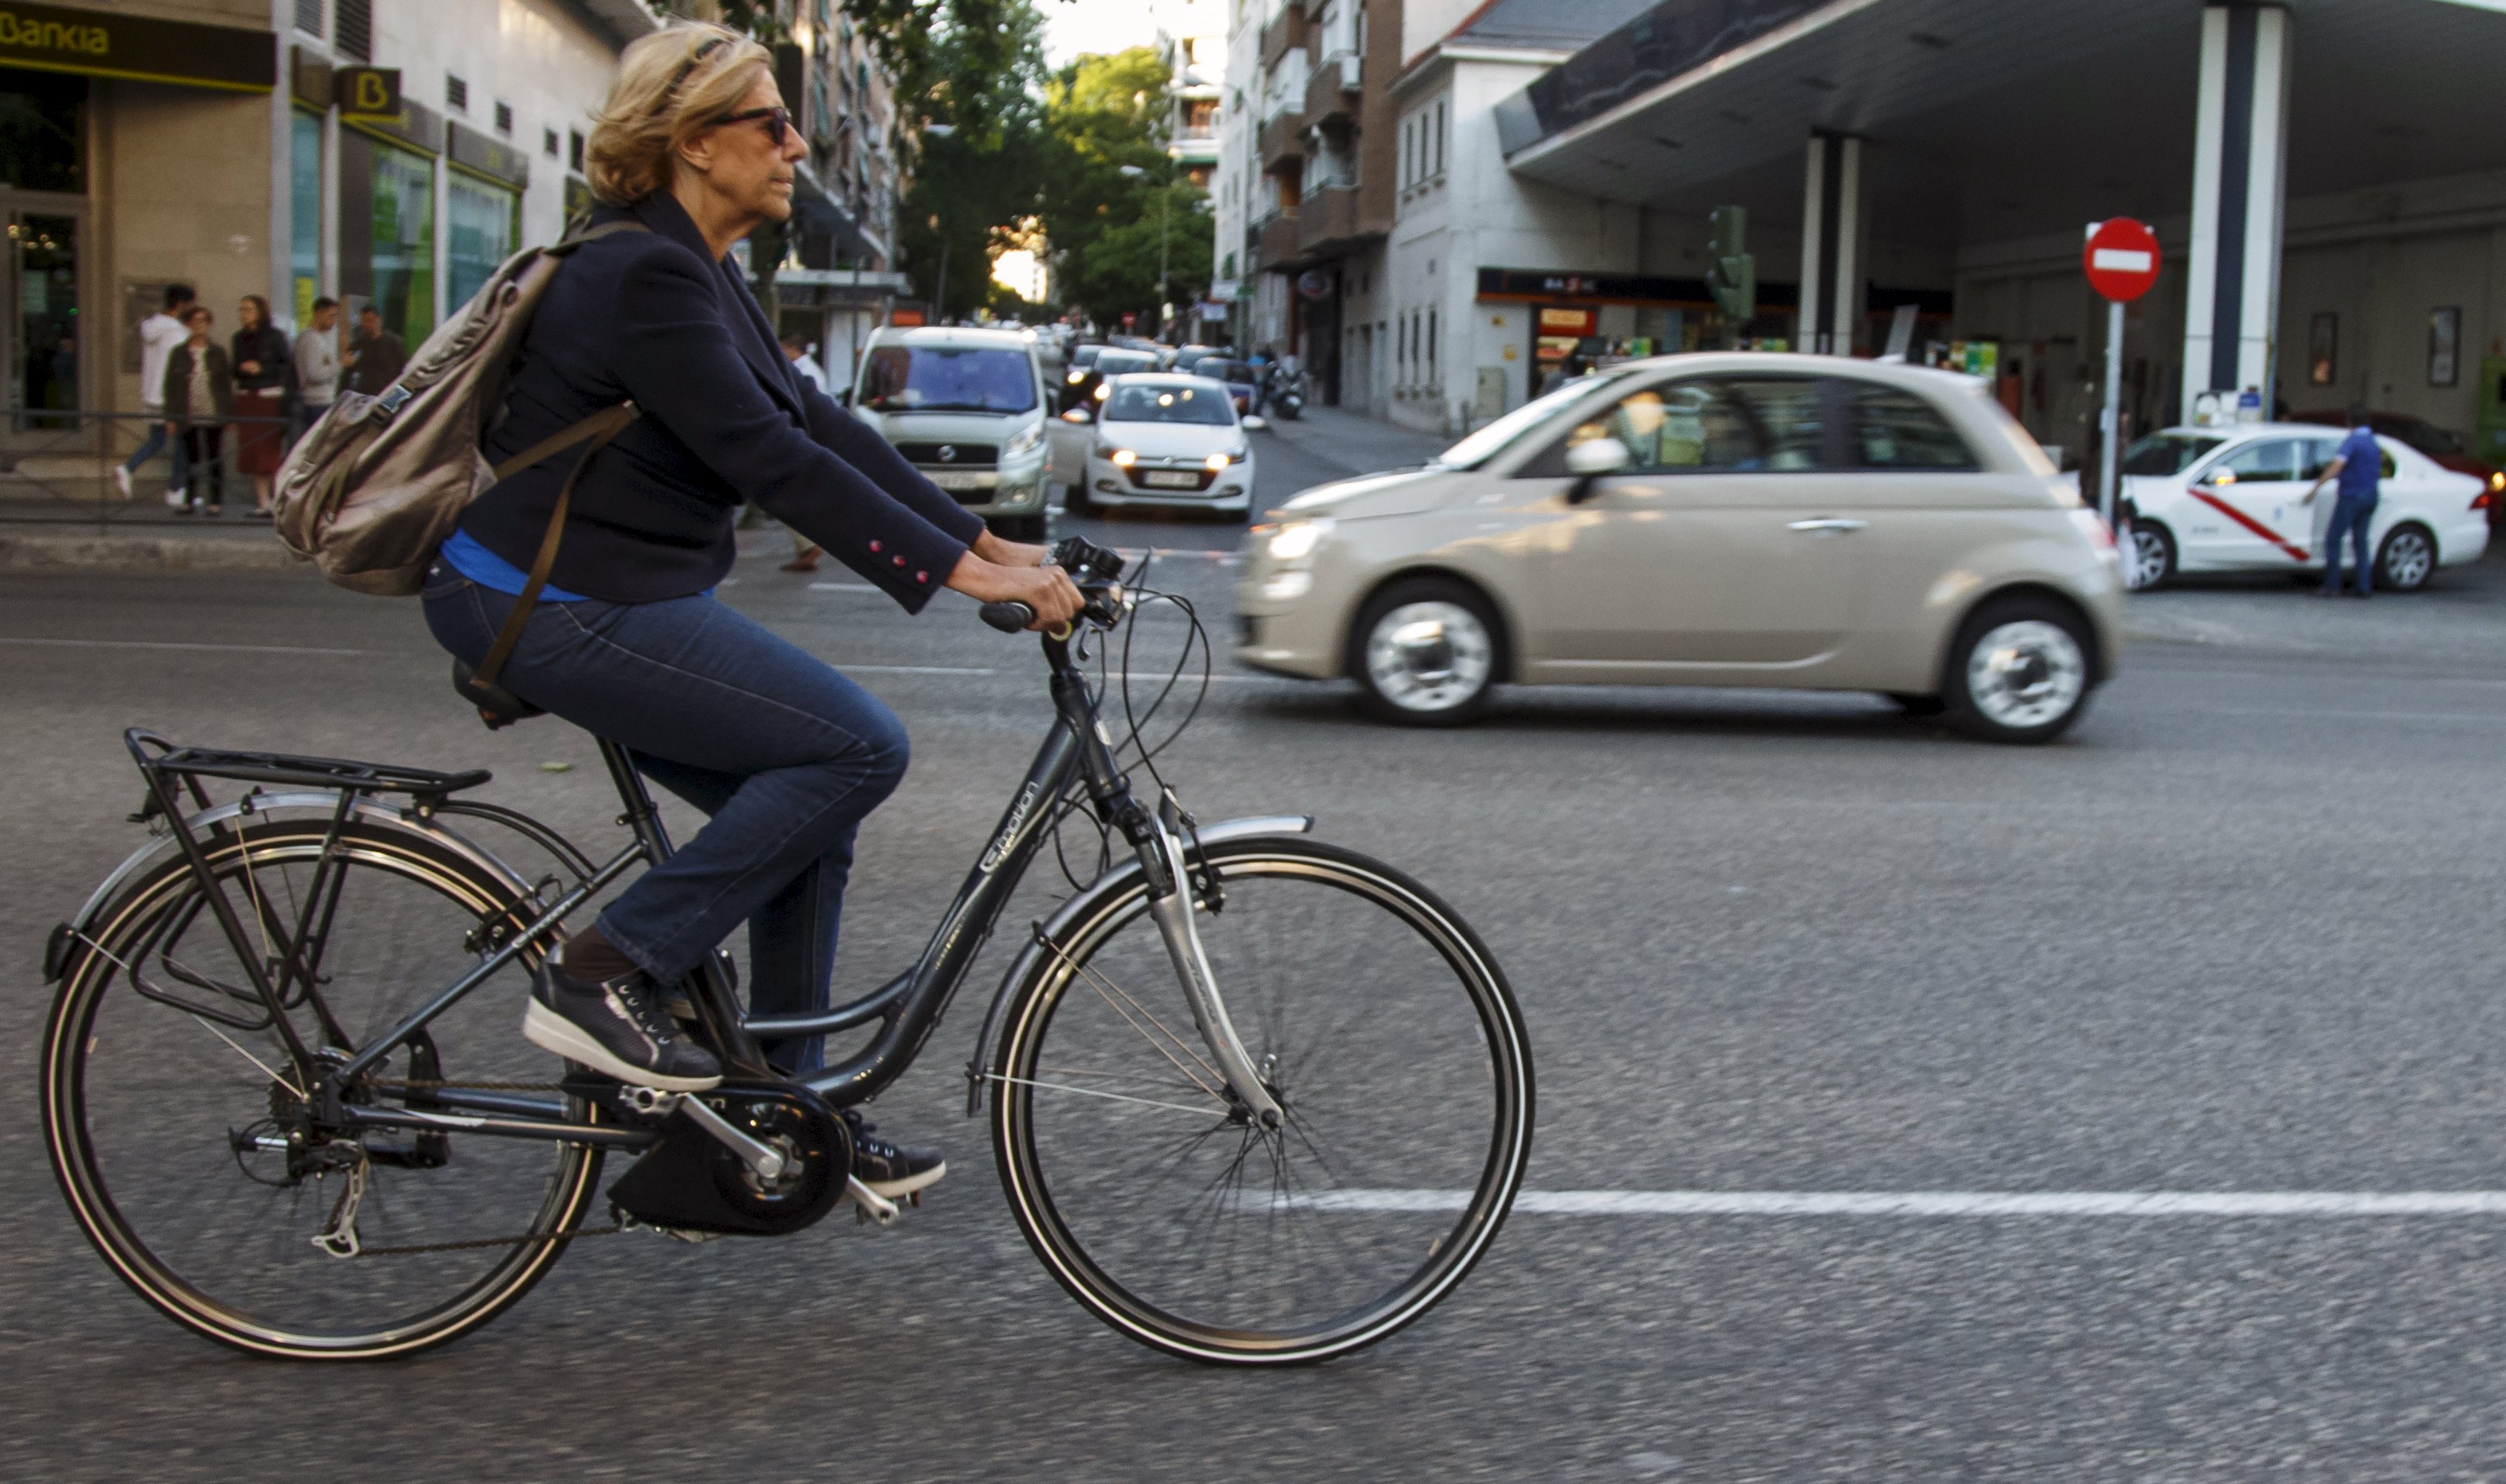 Manuela Carmena, local candidate of Ahora Madrid (Now Madrid), rides her bicycle through streets on her way to the closing electoral campaign rally before regional and municipal elections in Madrid, Spain, May 22, 2015. Spaniards are expected to sweep aside 40 years of predictable politics when they vote in regional elections on Sunday and usher in an unstable era of coalition and compromise, likely to curtail the authority of Spain's Prime Minister Mariano Rajoy. REUTERS/Sergio Perez